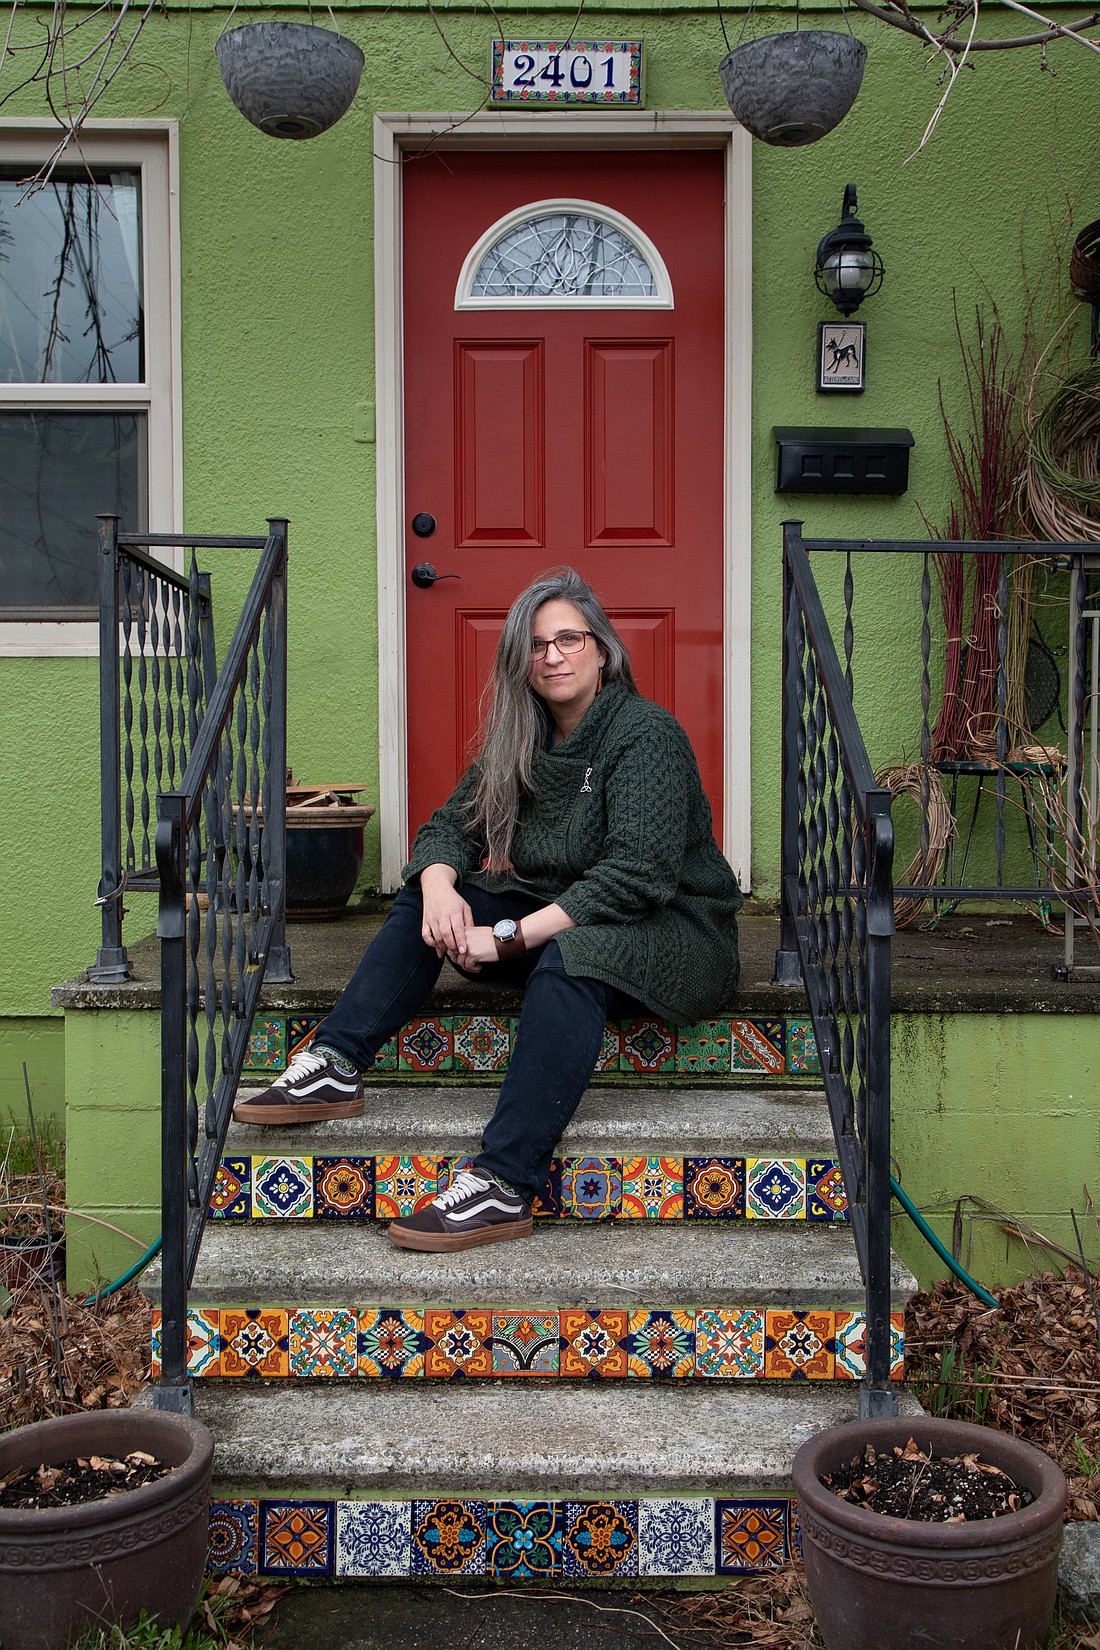 Janet Marino sits on the steps of her Bellingham porch Feb. 17. Behind her are bushels of yard scraps, which she will make into baskets. During the warmer months, when her front gardens are plentiful, Marino leaves excess produce on her porch for any passersby to take.